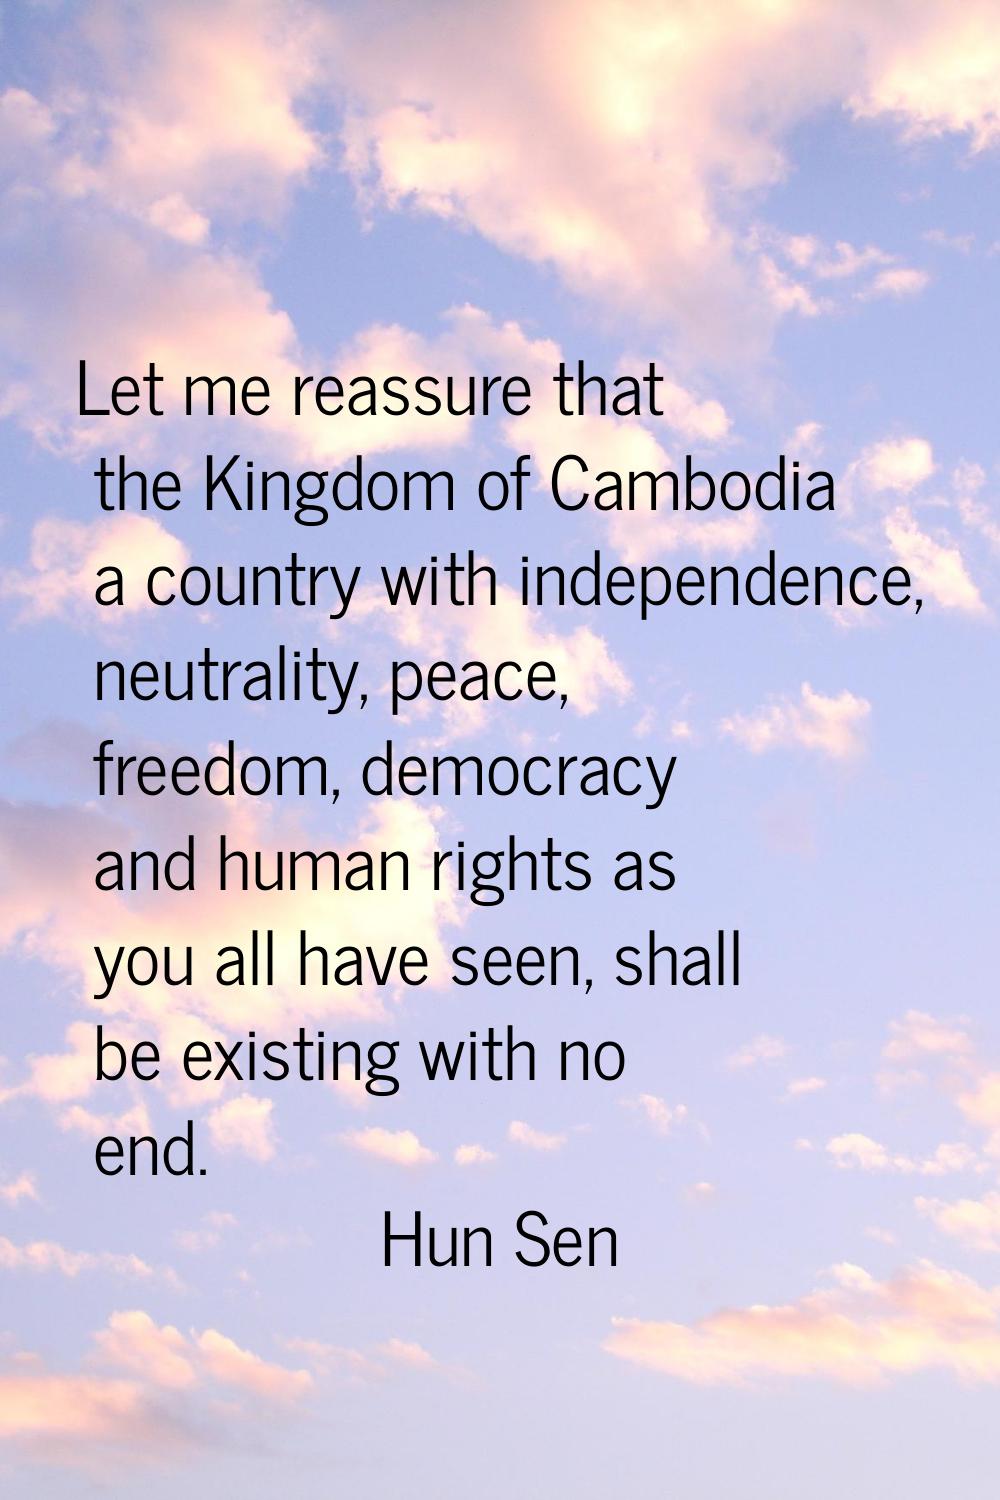 Let me reassure that the Kingdom of Cambodia a country with independence, neutrality, peace, freedo